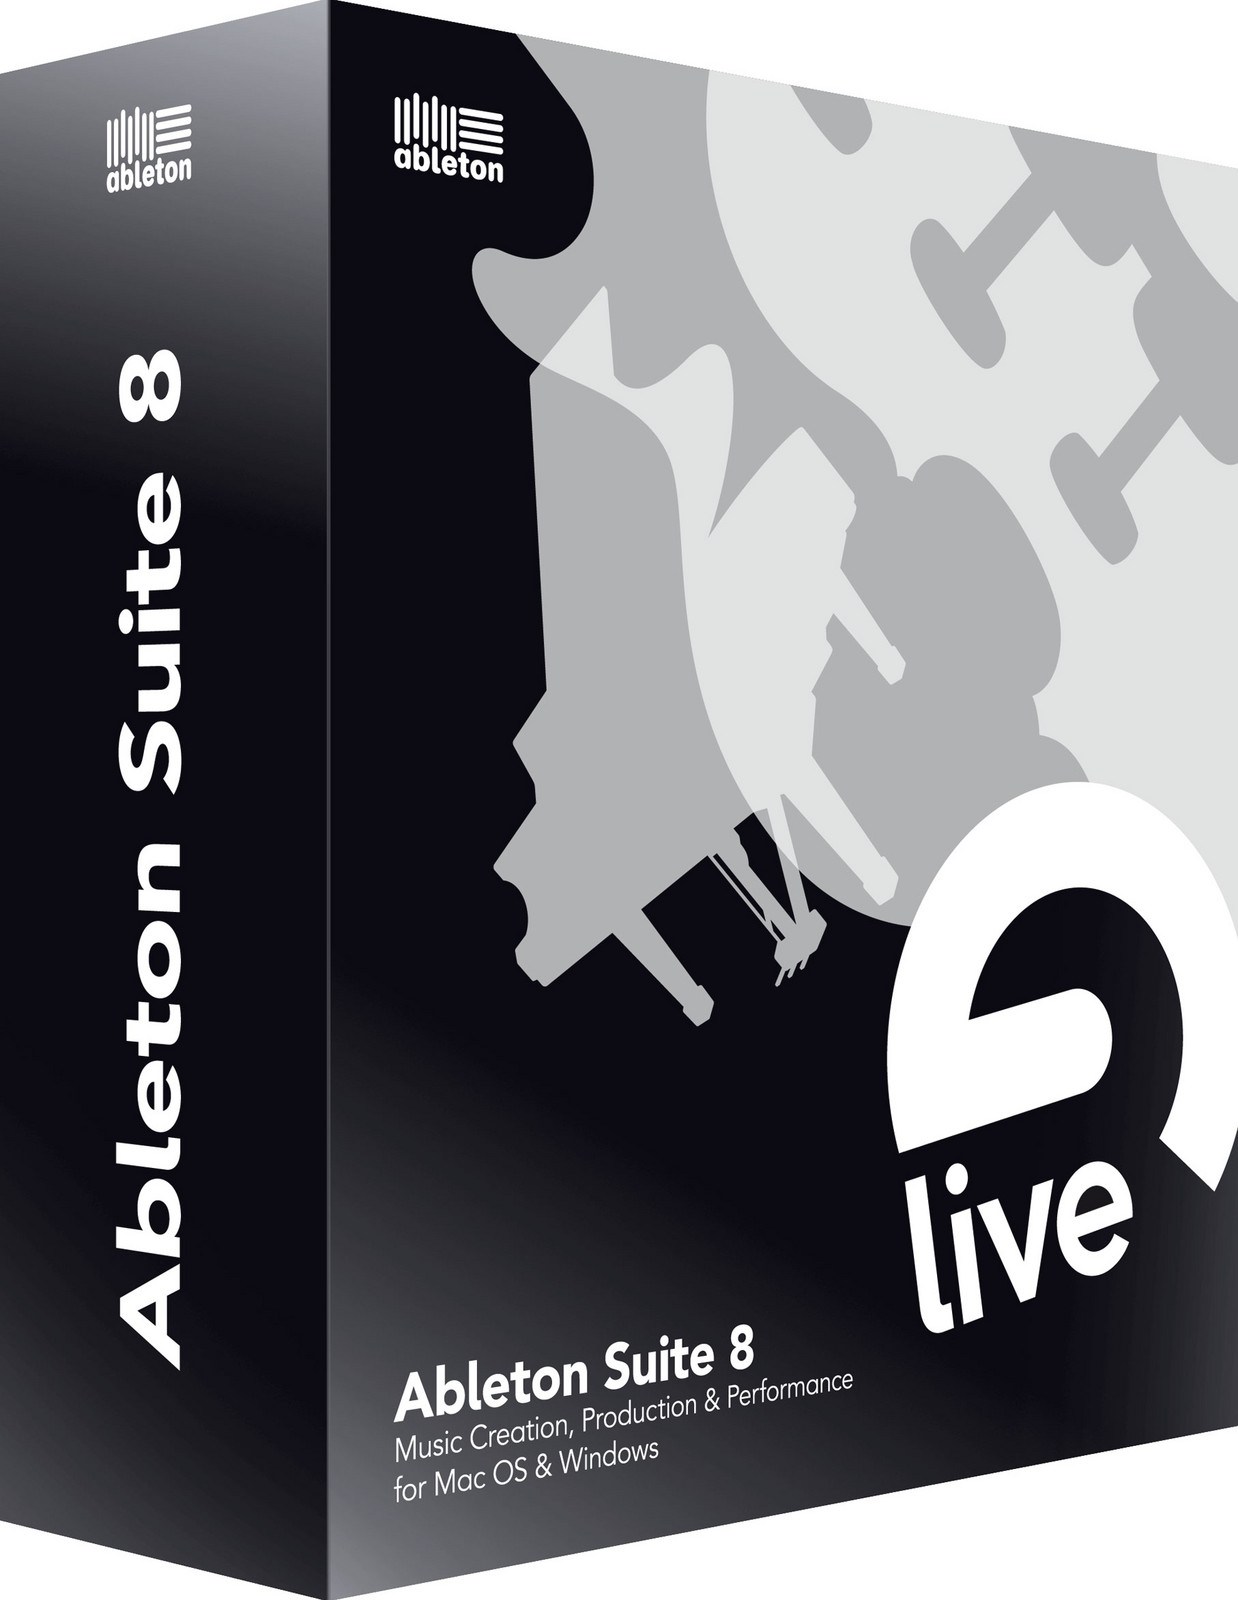 how to authorize ableton live 9 crack